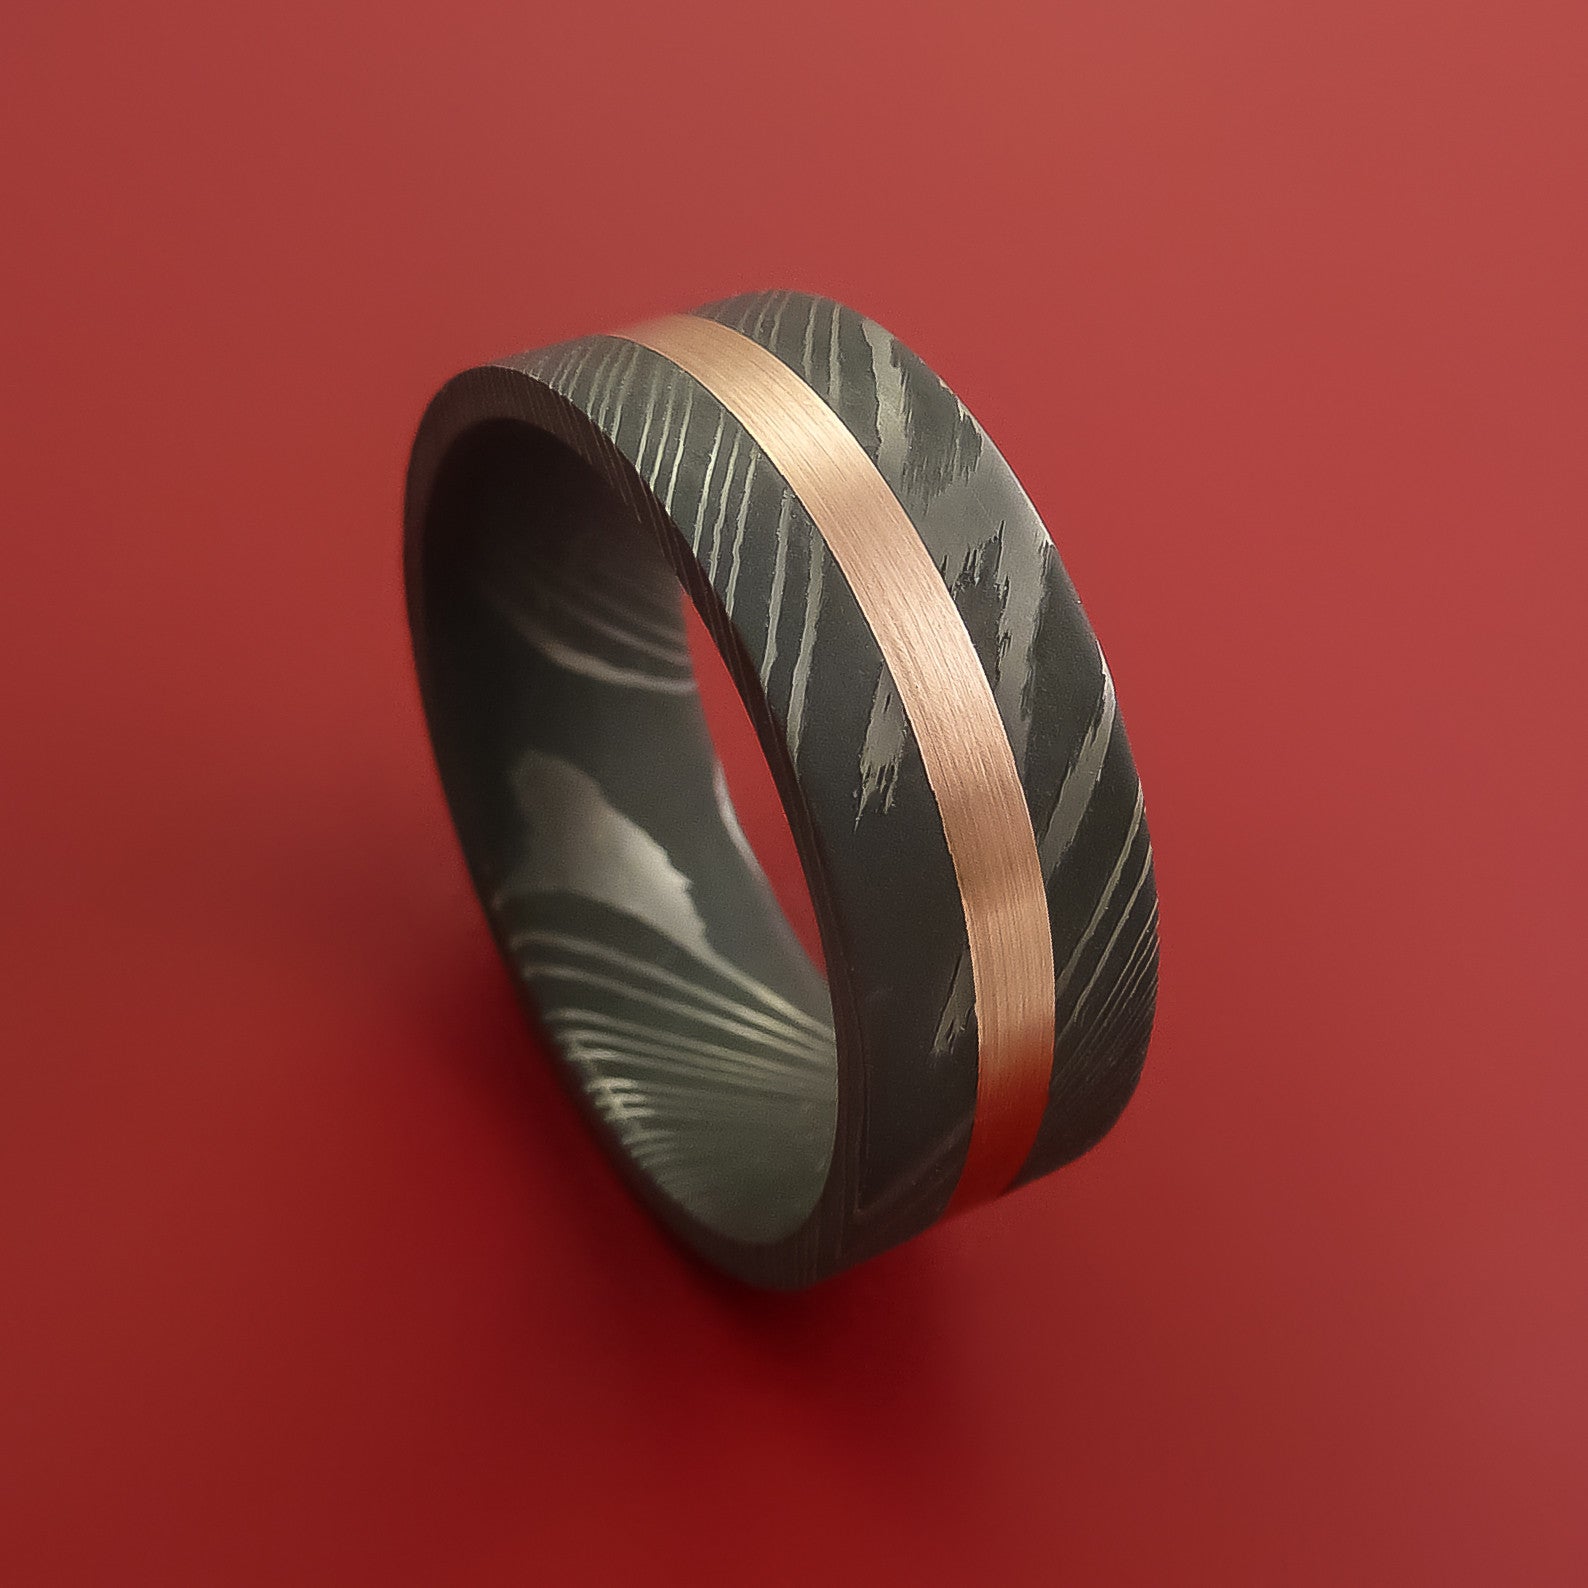 Using Alternative Metals in Jewelry Design: Stainless Steel Jewelry - Made  by CustomMade